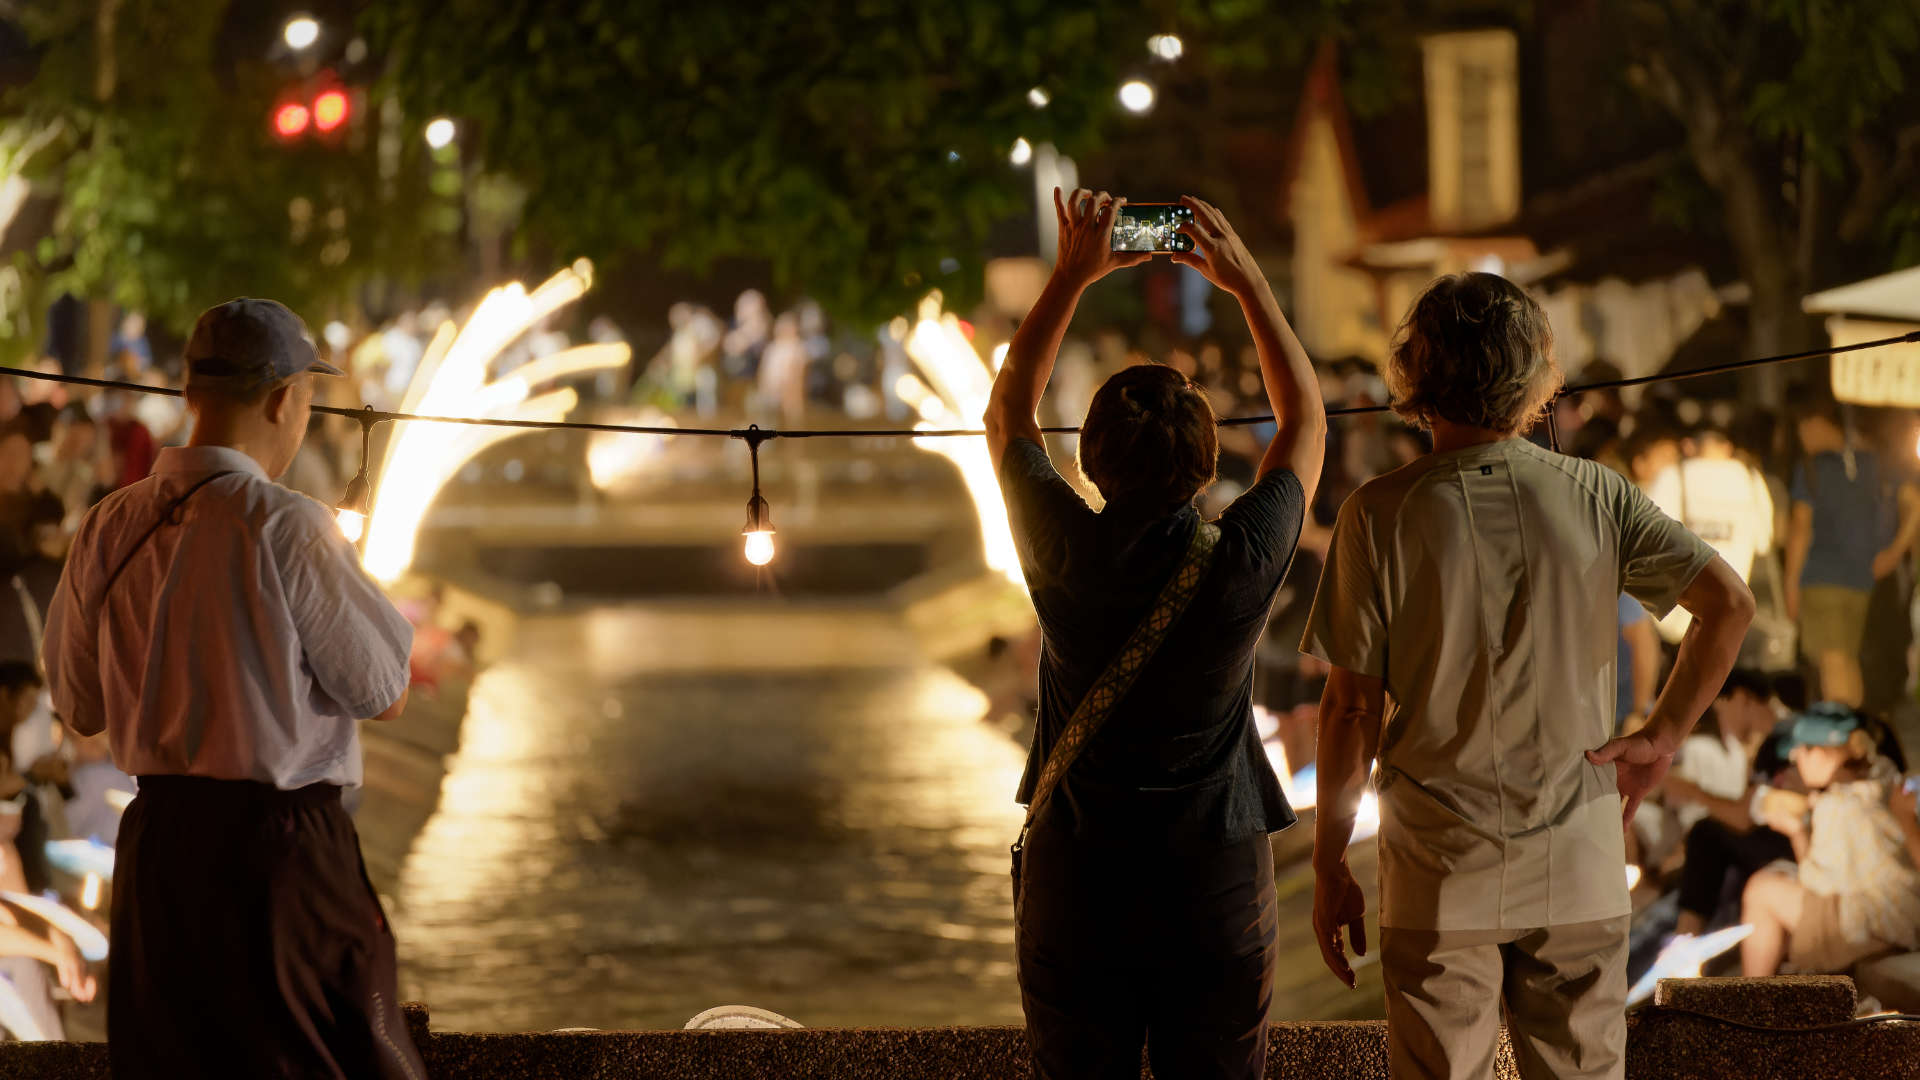 Three people standing on a bridge at night, looking at the view of a lantern-lit canal. One of the people is holding a phone above her head, taking a photo.